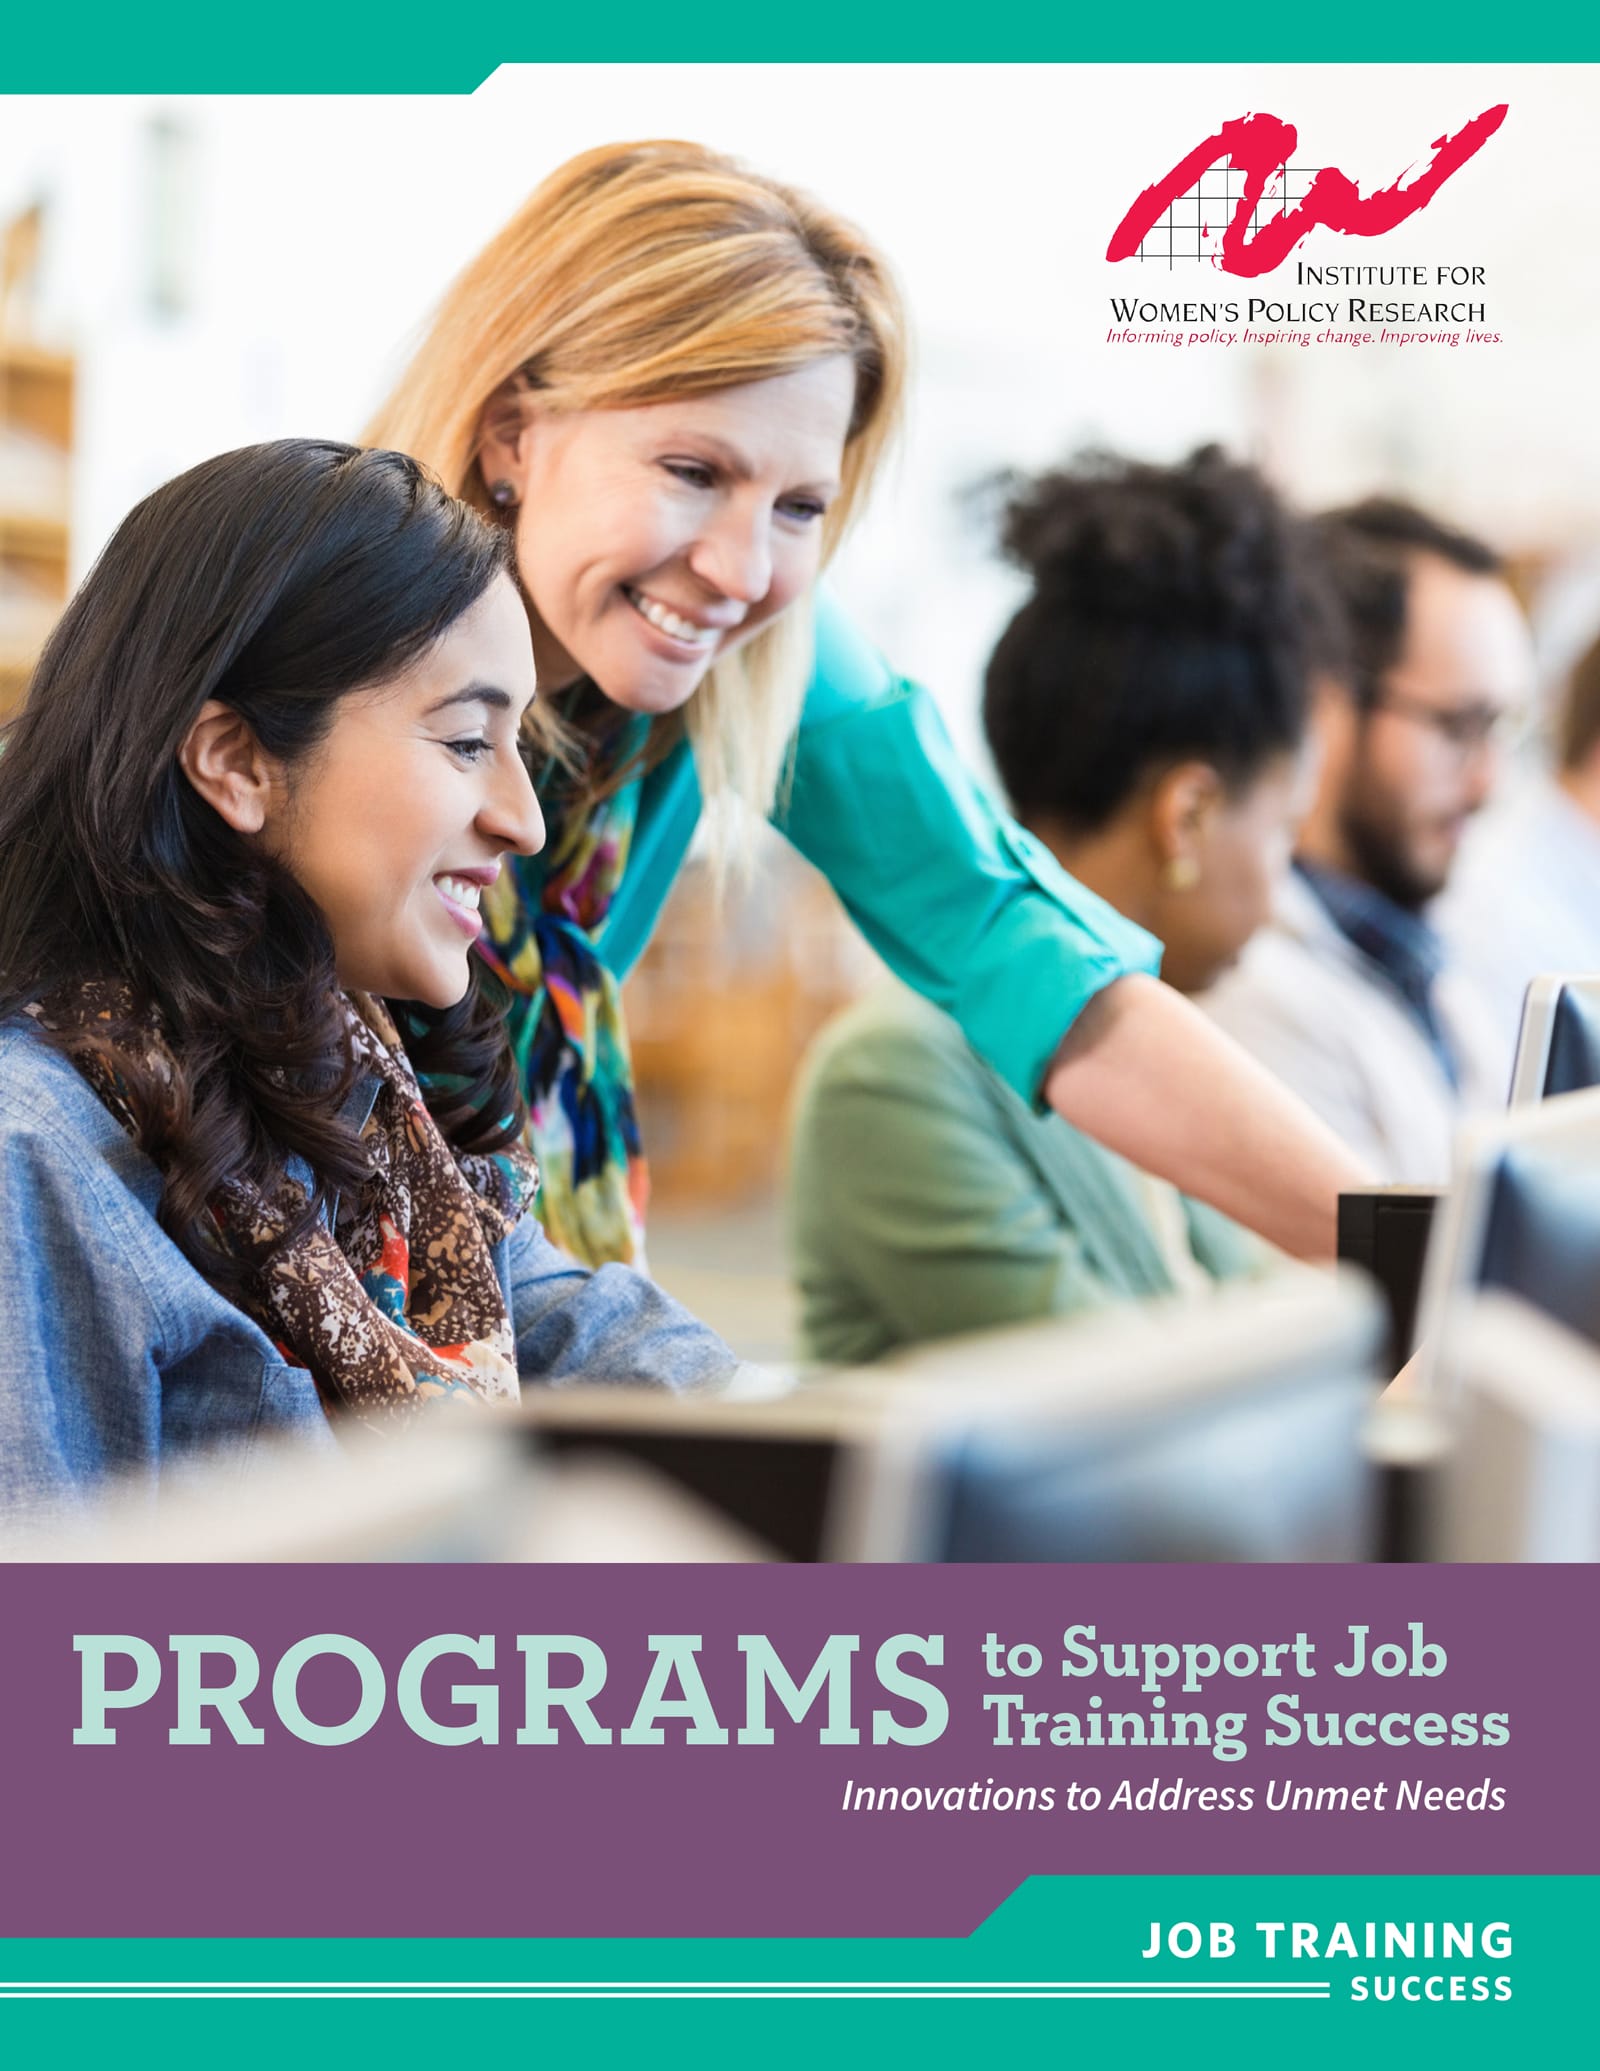 Institute for Women’s Policy Research Recognizes Climb for Innovations in Job Training